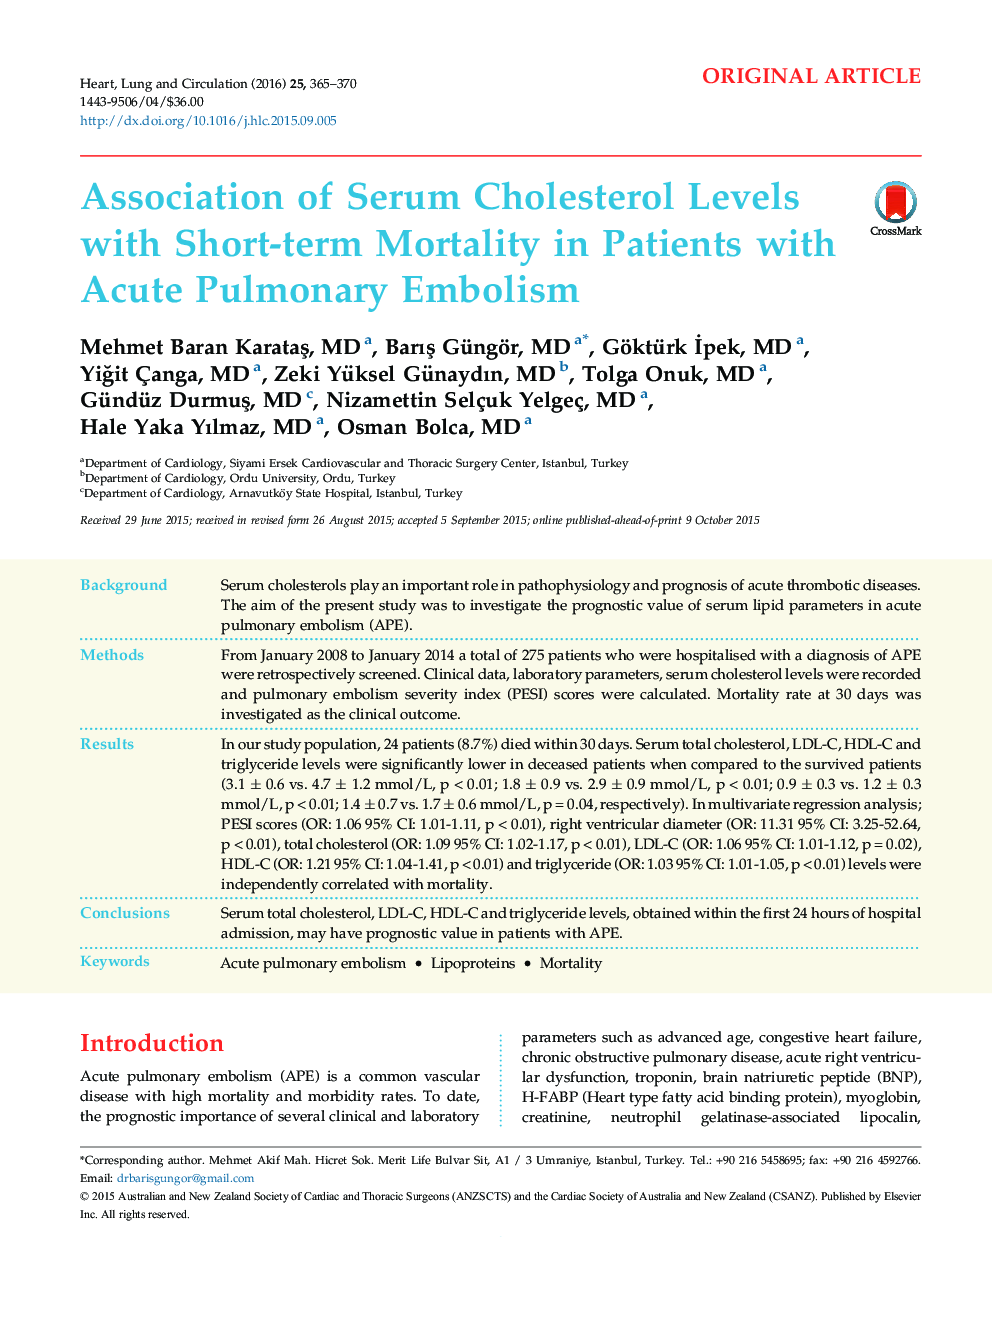 Association of Serum Cholesterol Levels with Short-term Mortality in Patients with Acute Pulmonary Embolism